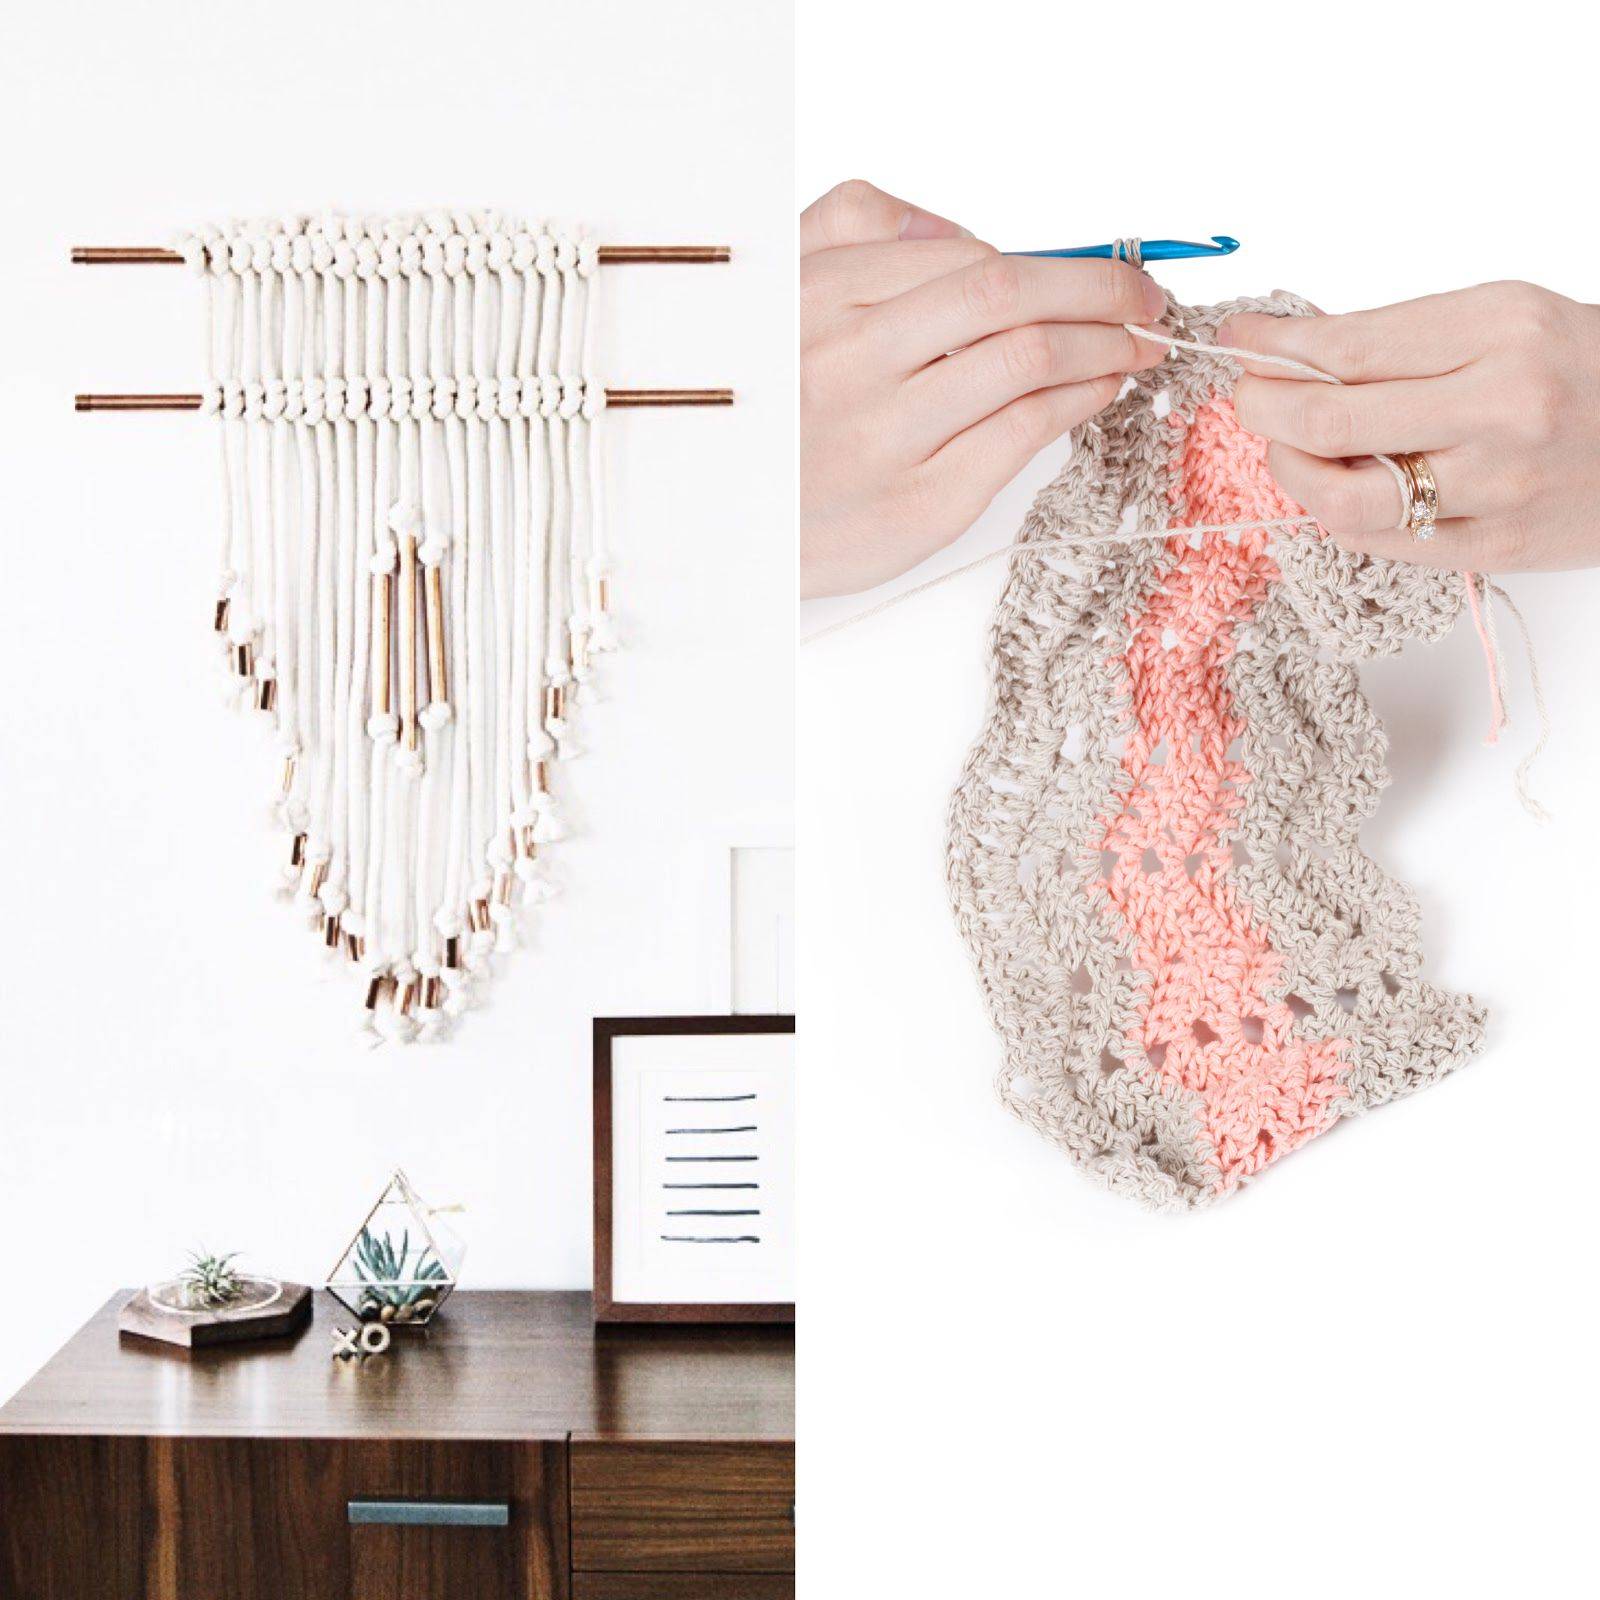 Differences Between Crochet and Macrame